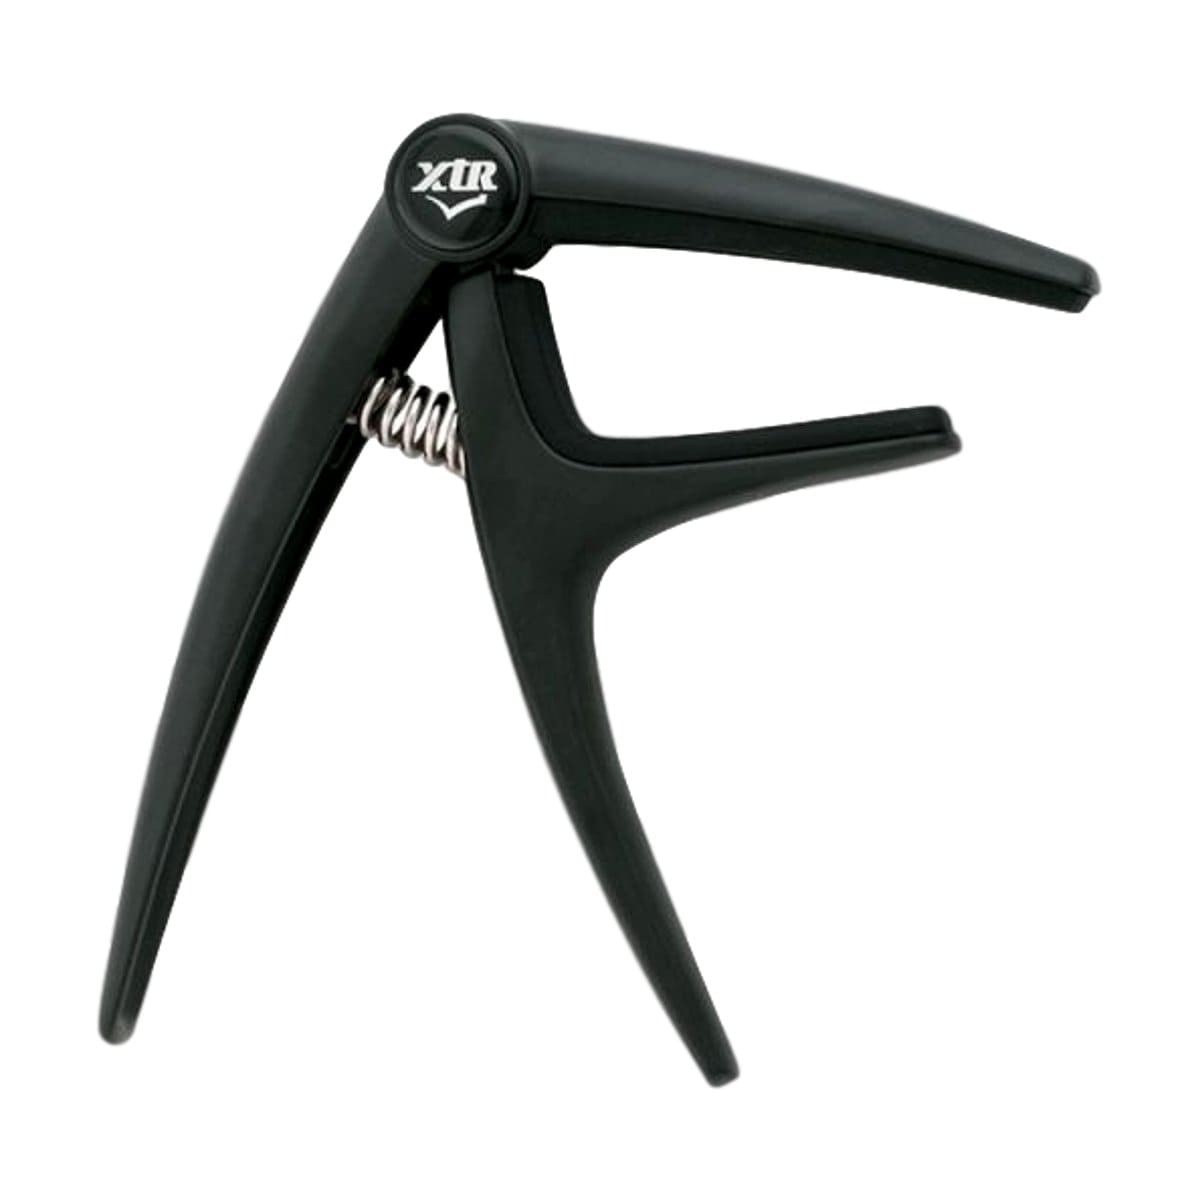 XTR Guitar Accessories XTR Capo Curved for Acoustic and Electric Guitars GPX50B - Byron Music